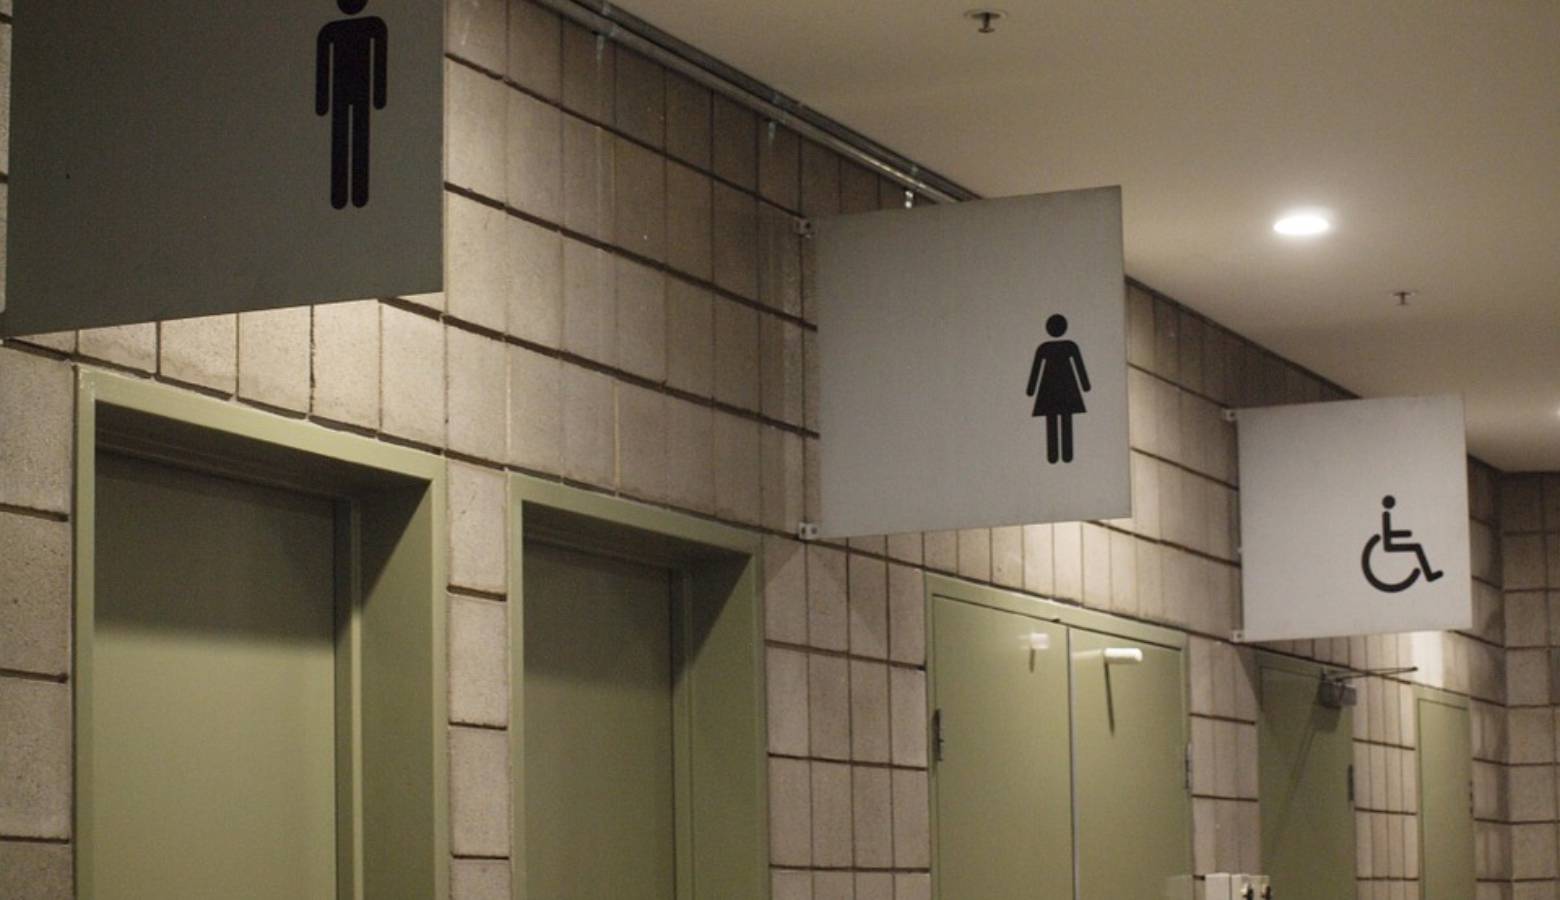 The White House has released new guidance allowing schools to determine which bathrooms transgender students may use. (Pixabay)